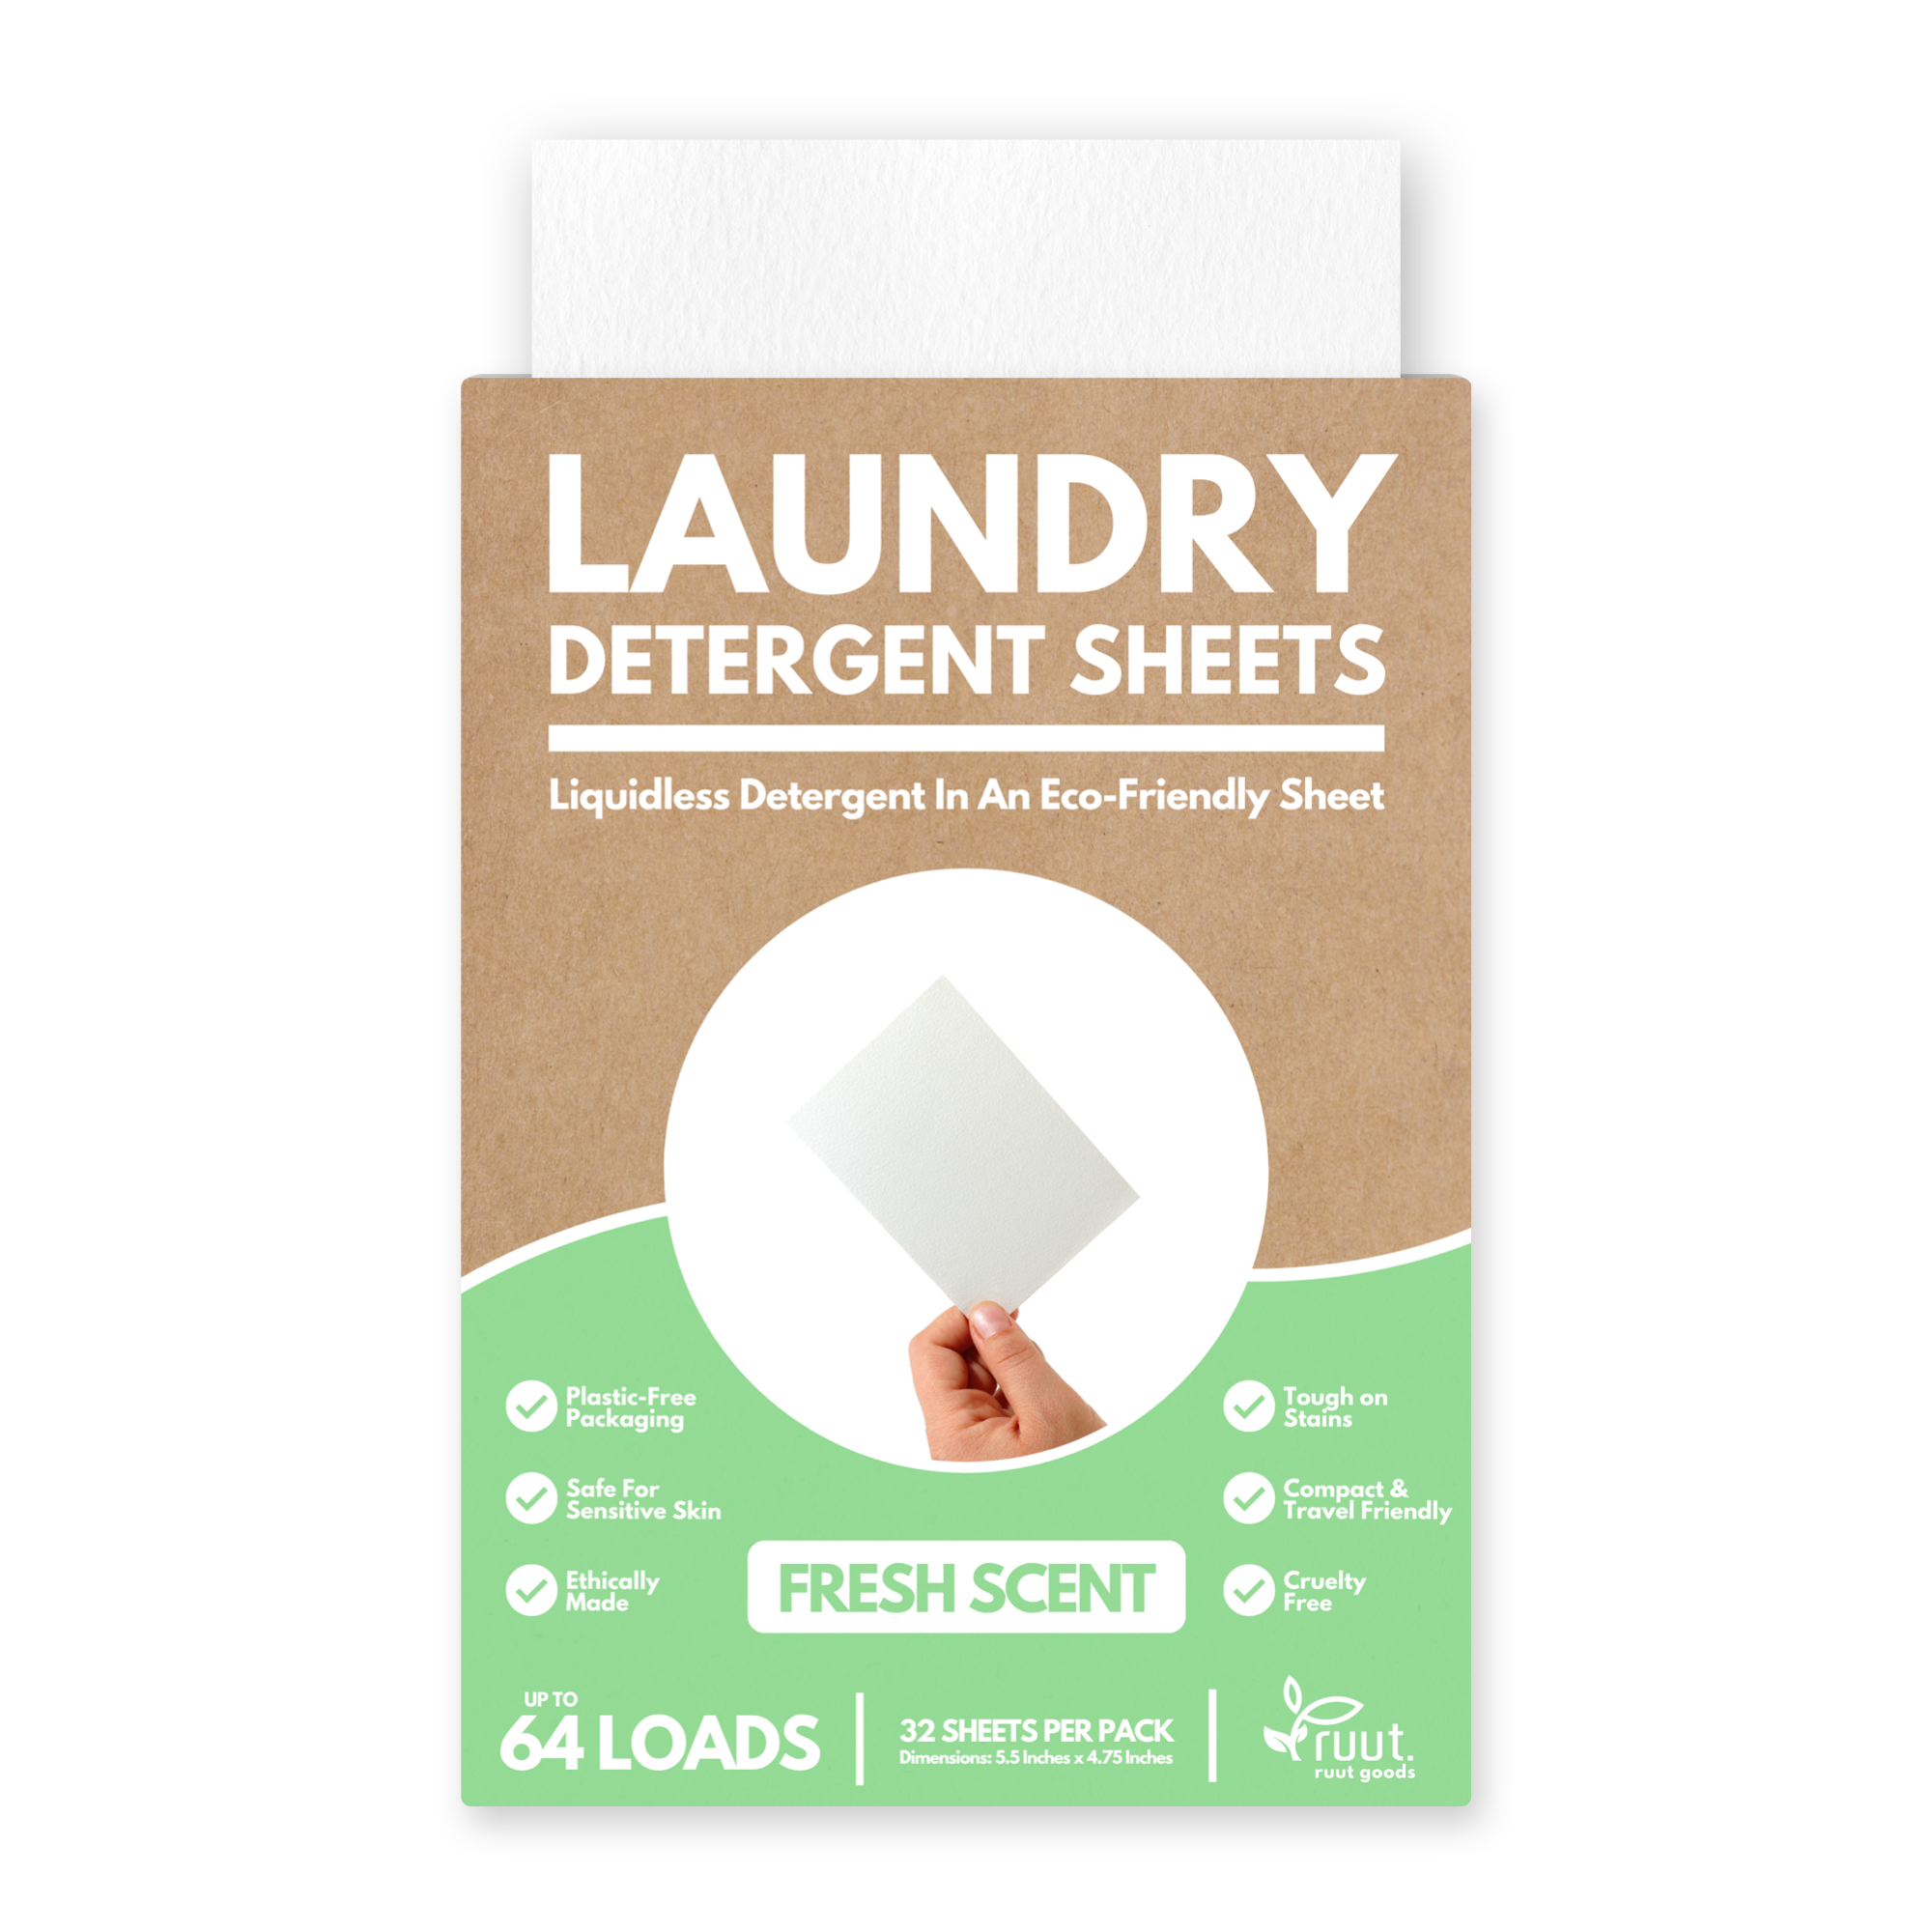 Laundry Today  What Are Laundry Detergent Sheets?